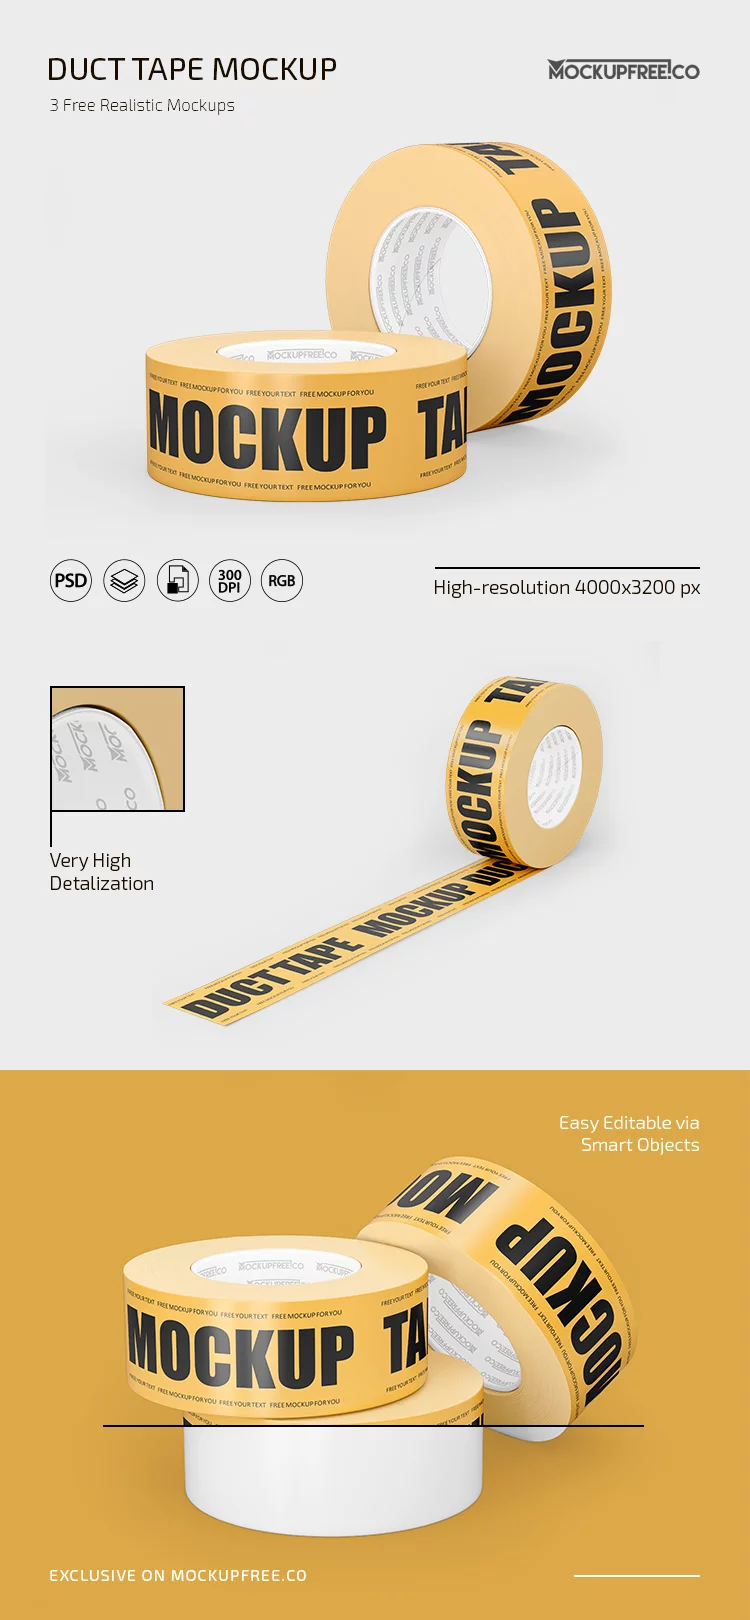 Free Duct Tape Mockup in PSD